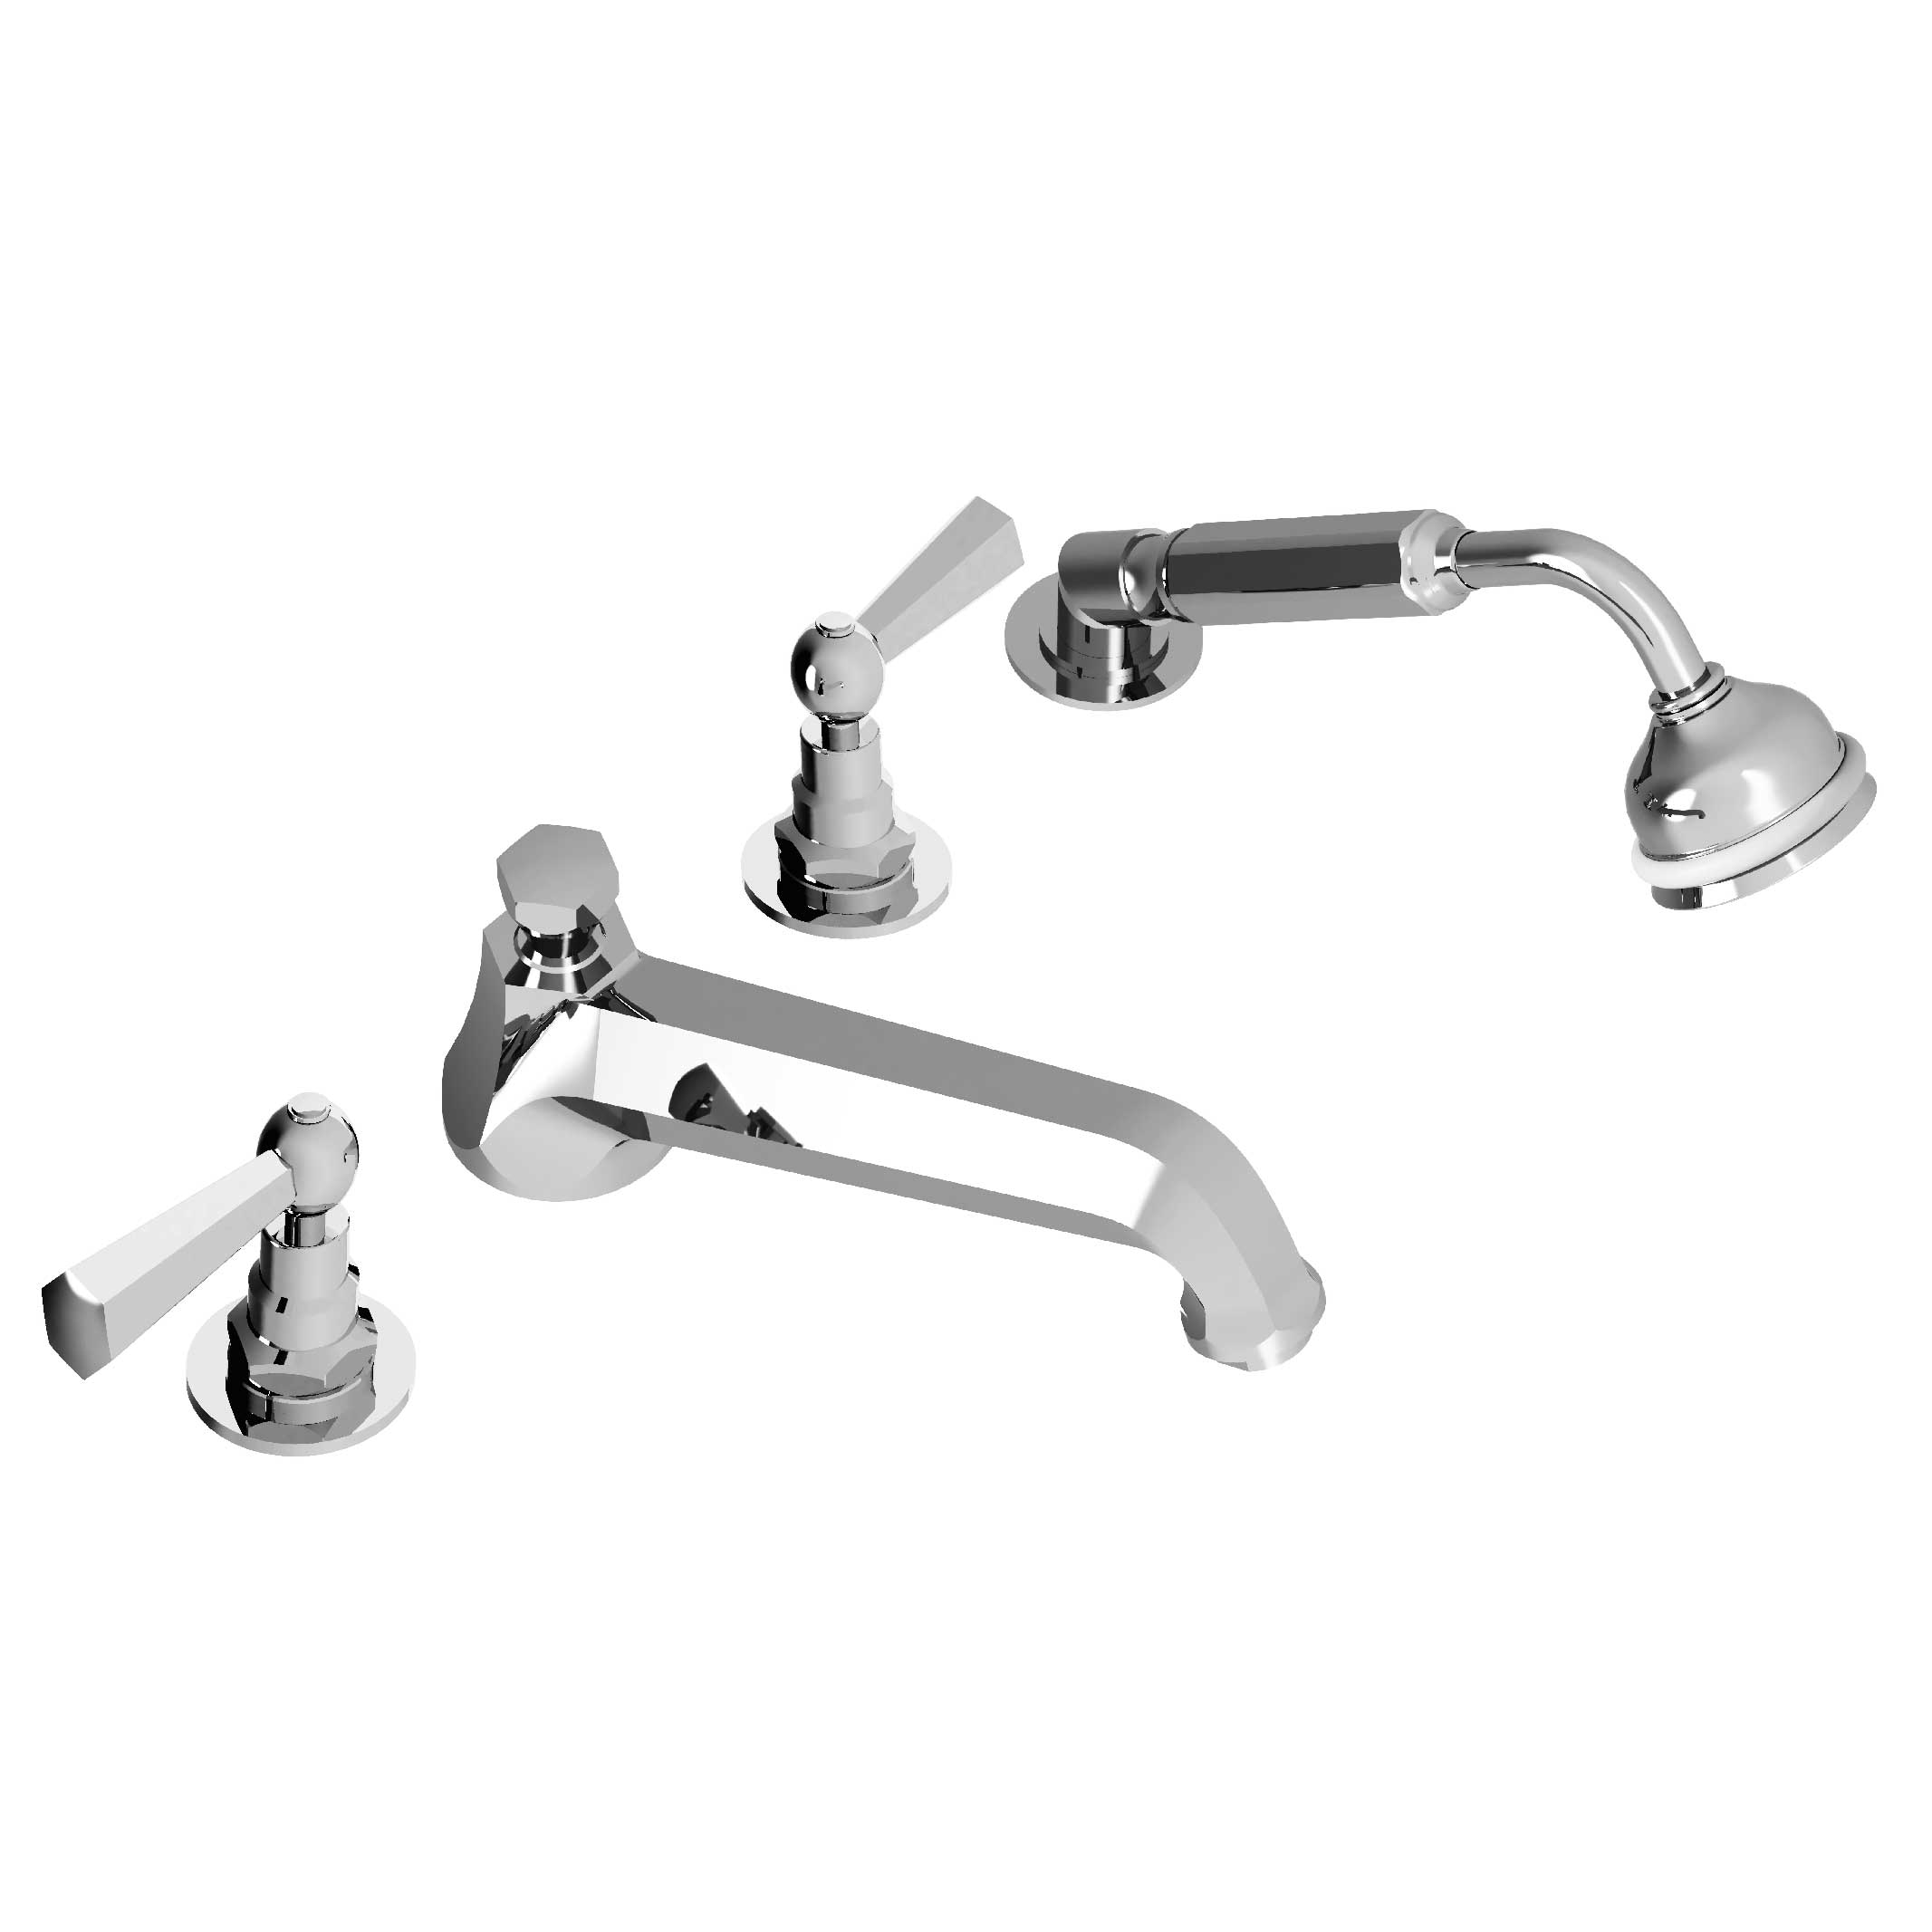 M39-3304 4-hole bath and shower mixer